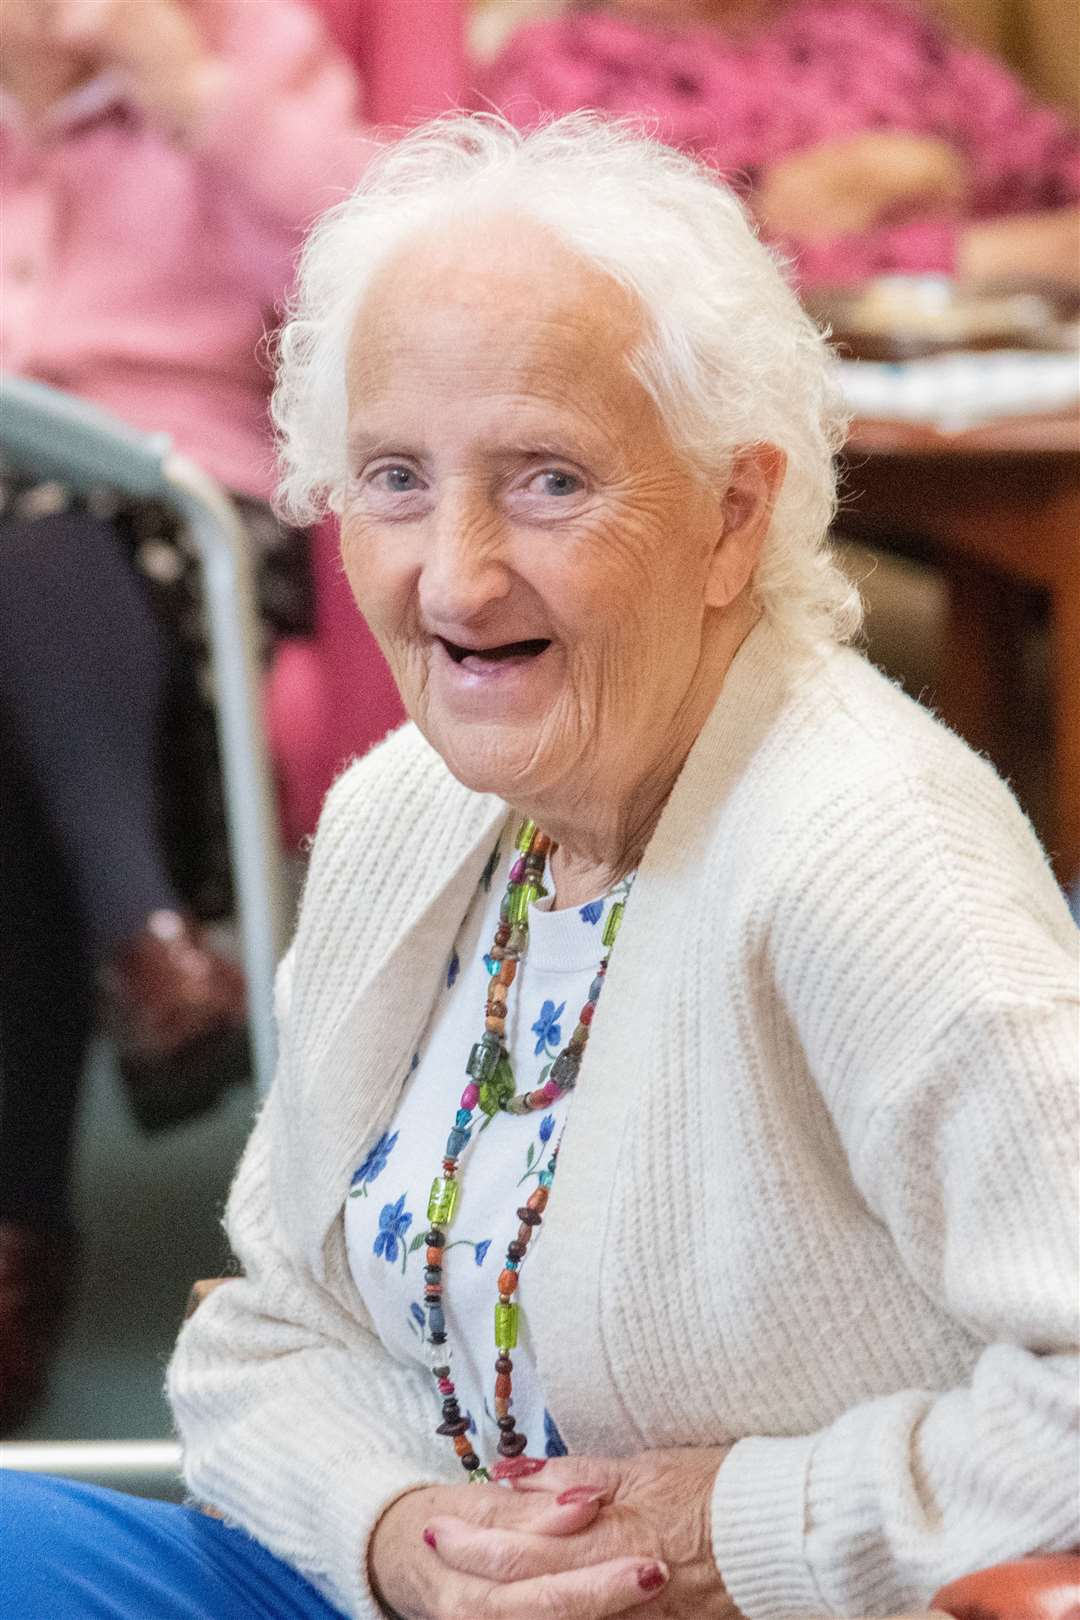 A delighted resident at Anderson's who clearly enjoyed the performance. Picture: Daniel Forsyth